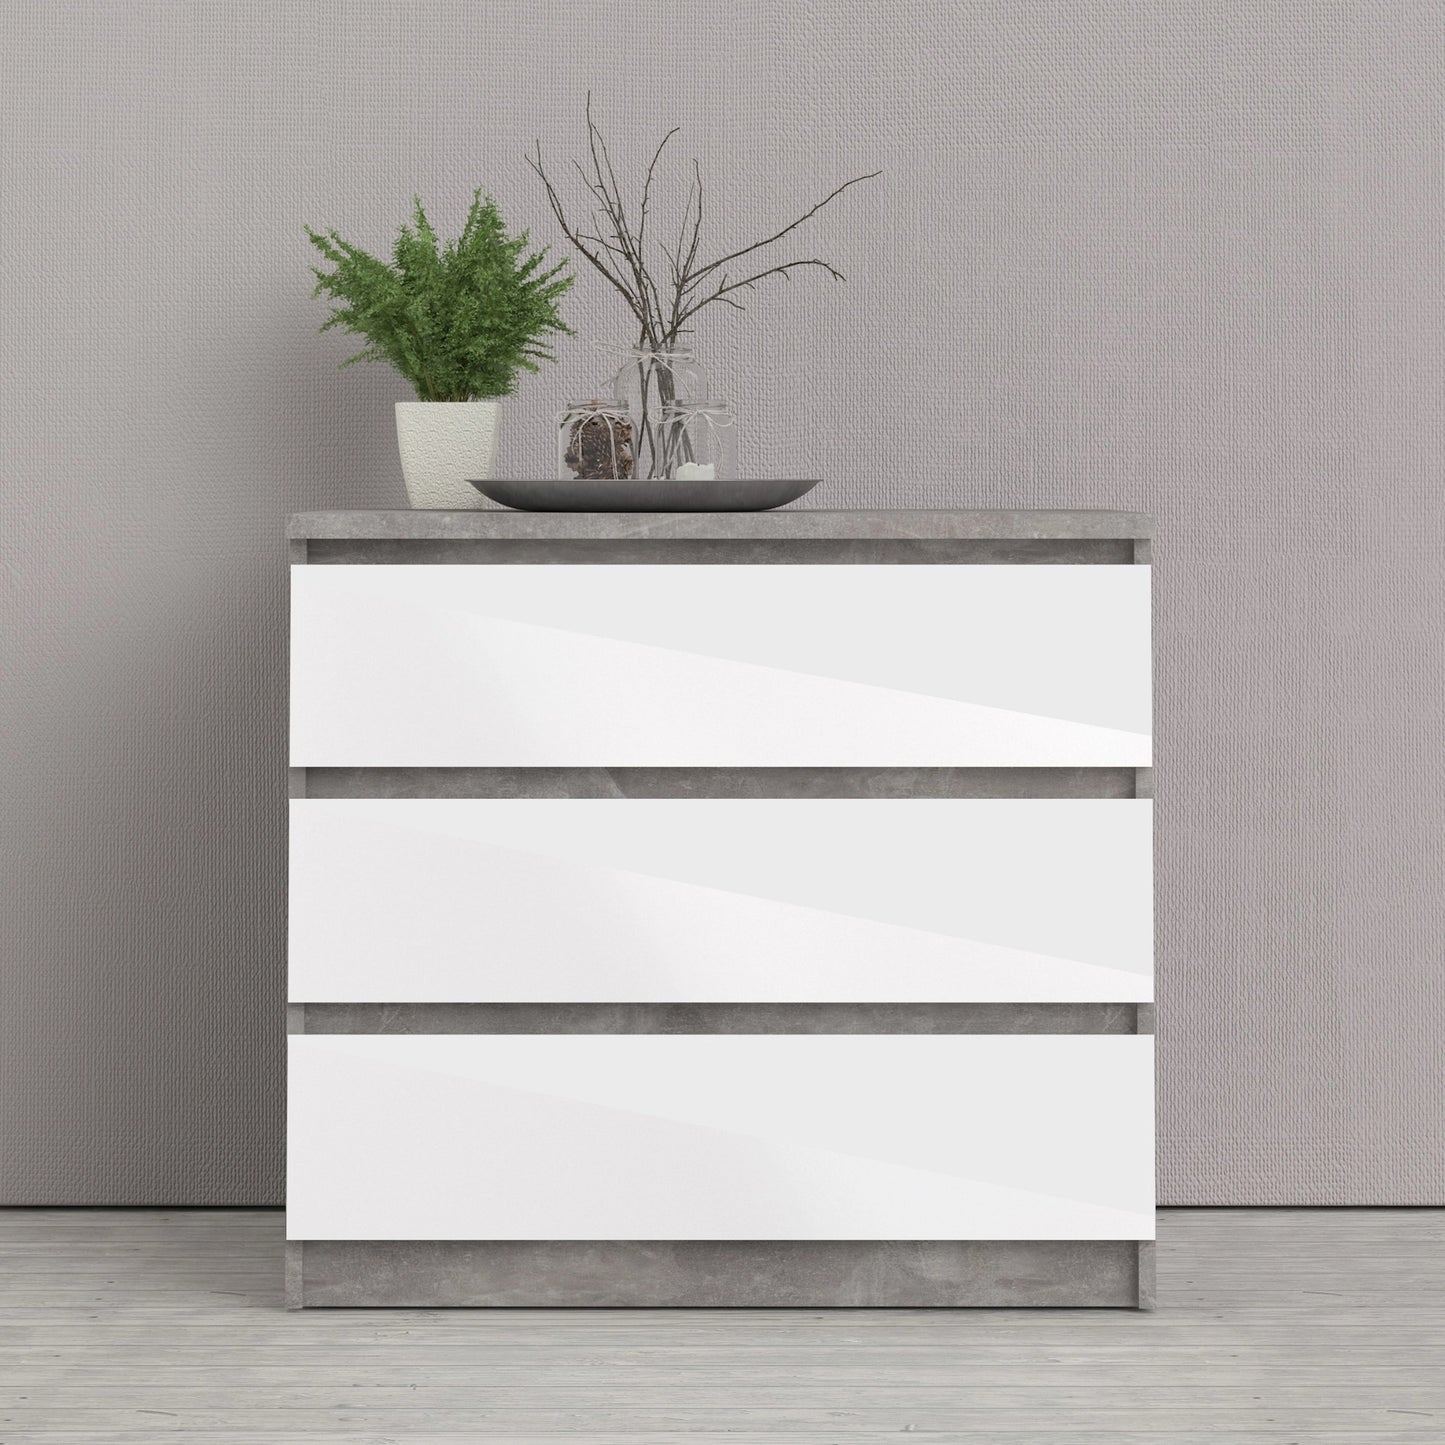 Furniture To Go Naia Chest of 3 Drawers in Concrete & White High Gloss